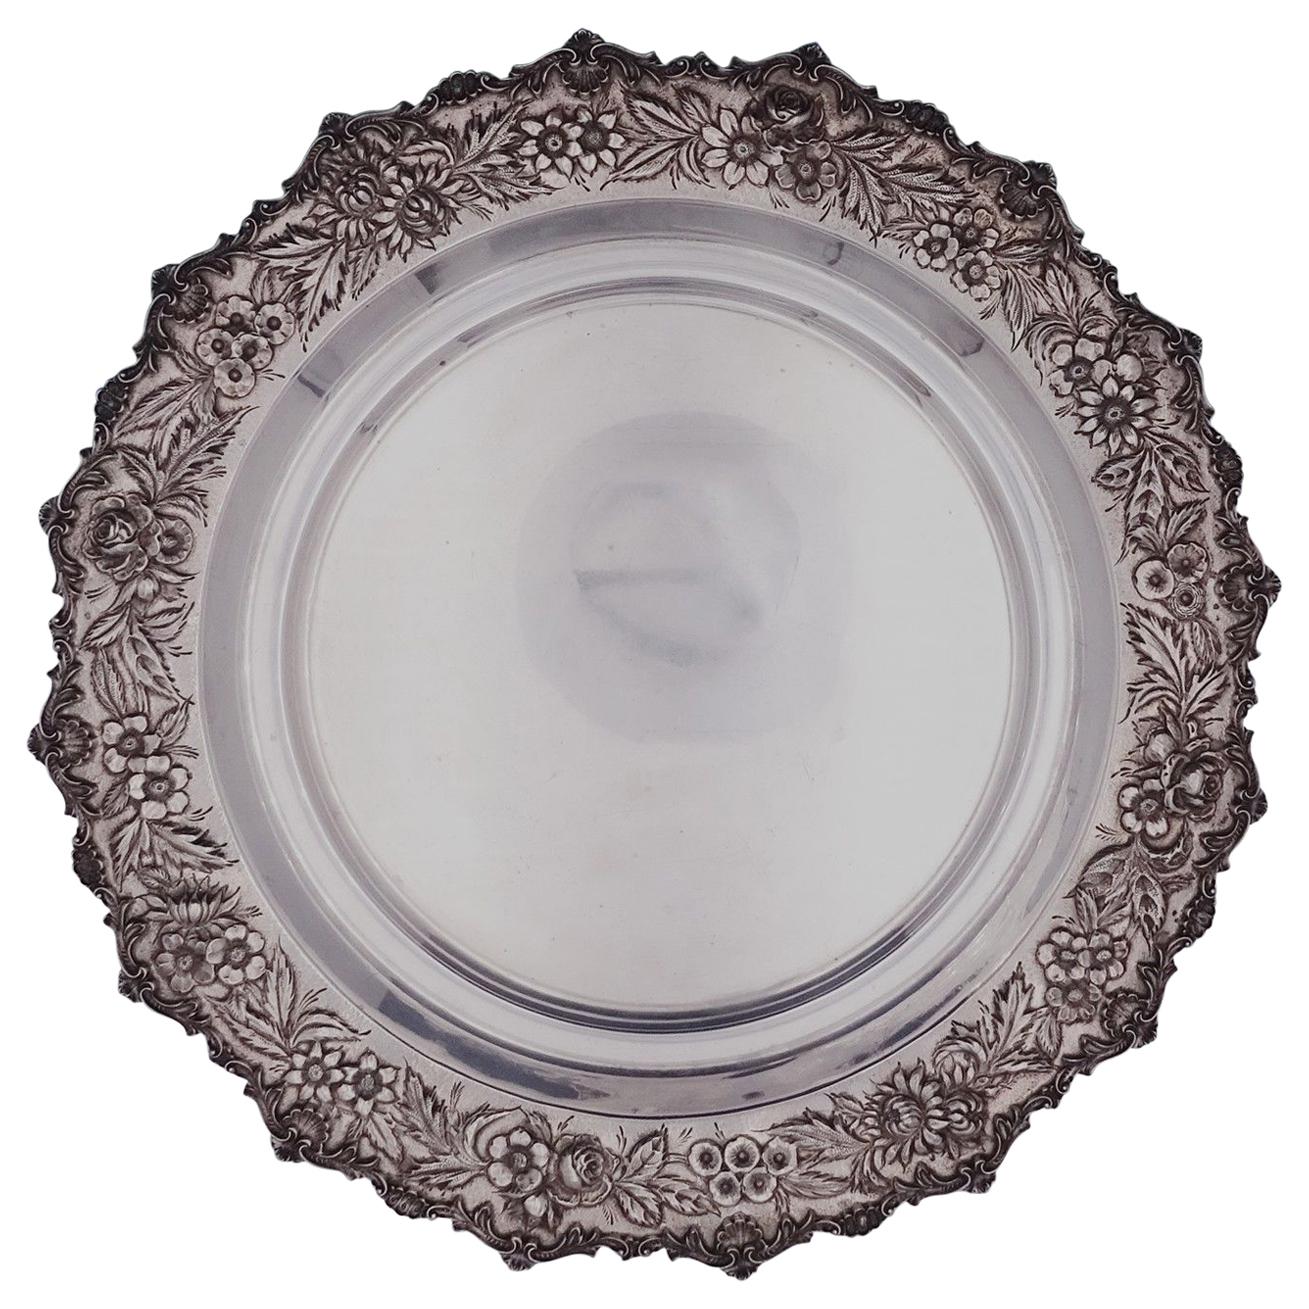 Repousse by Kirk Sterling Silver Tray Round #2544